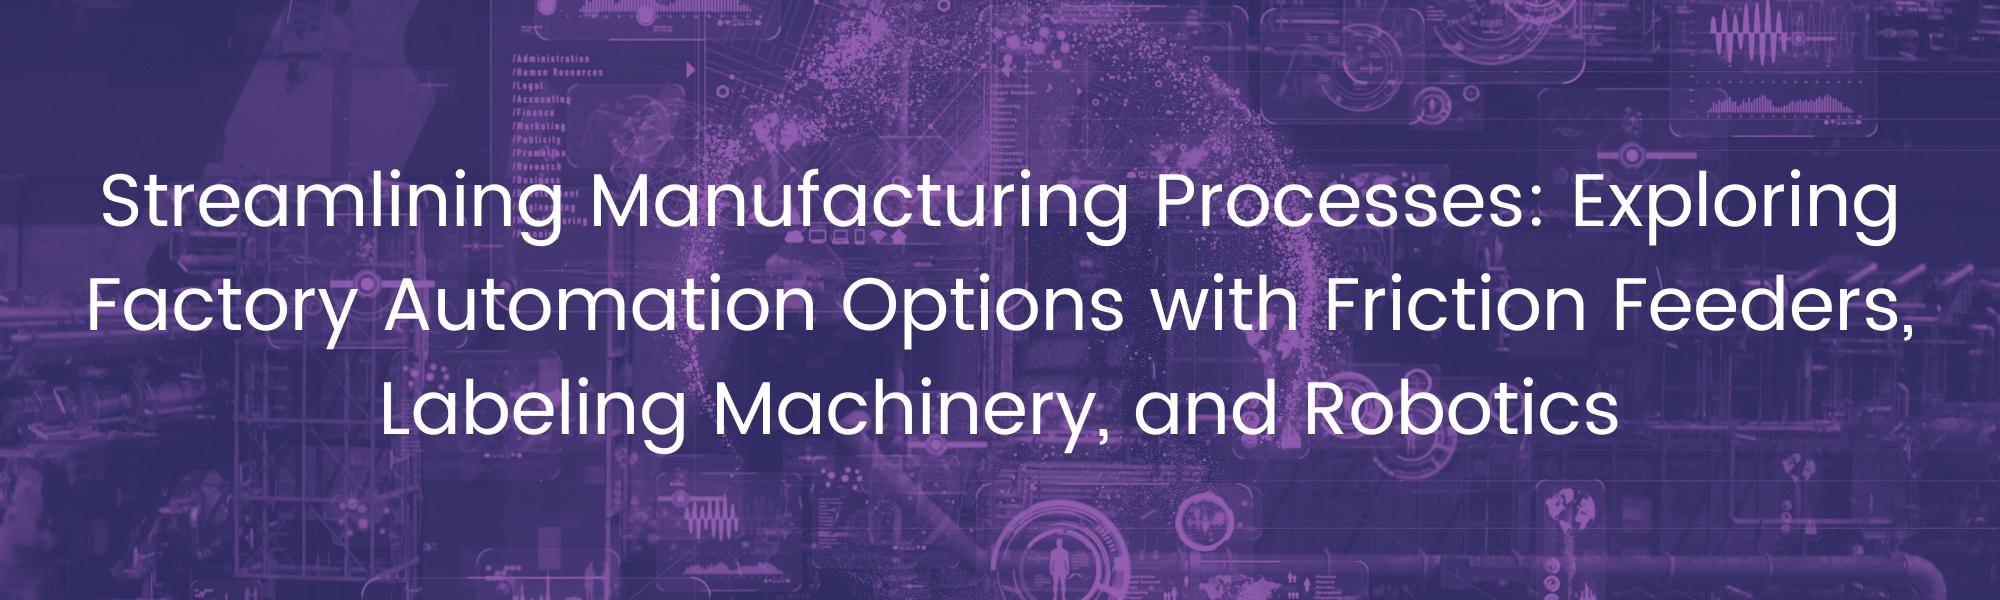 Factory Automation Blog Header